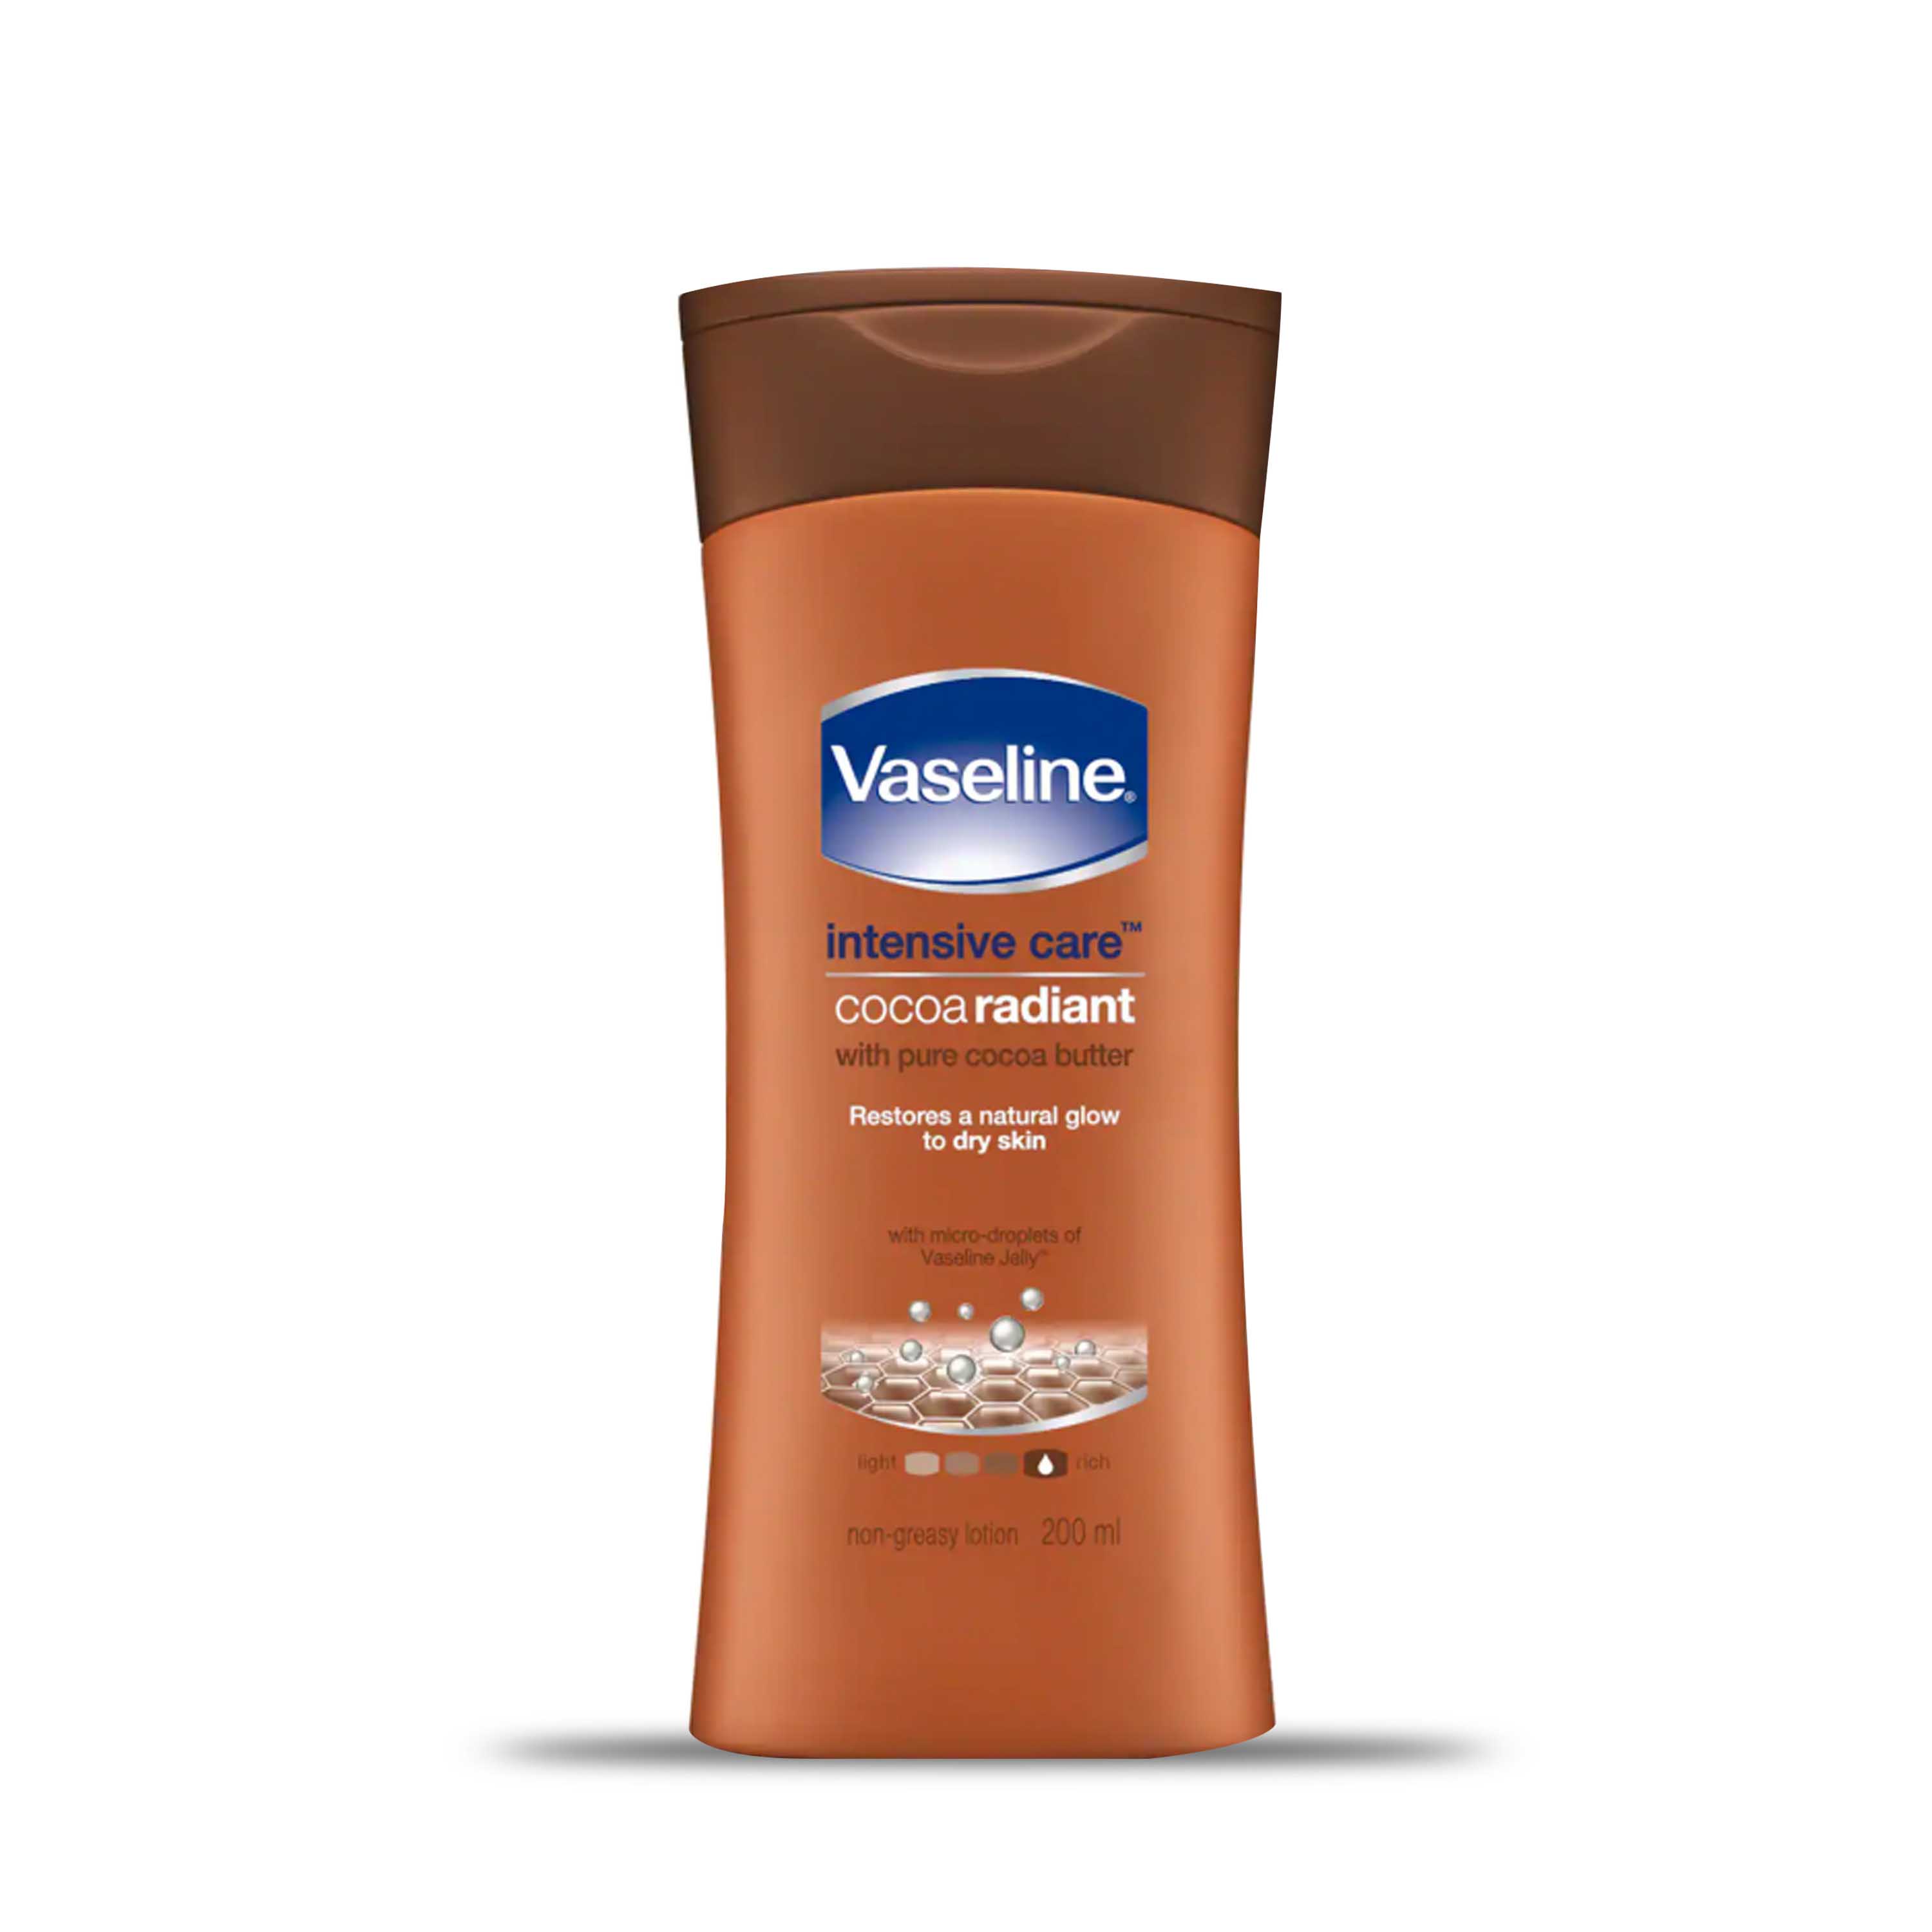 Vaseline Intensive Care Cocoa Radiant Lotion 200 ml